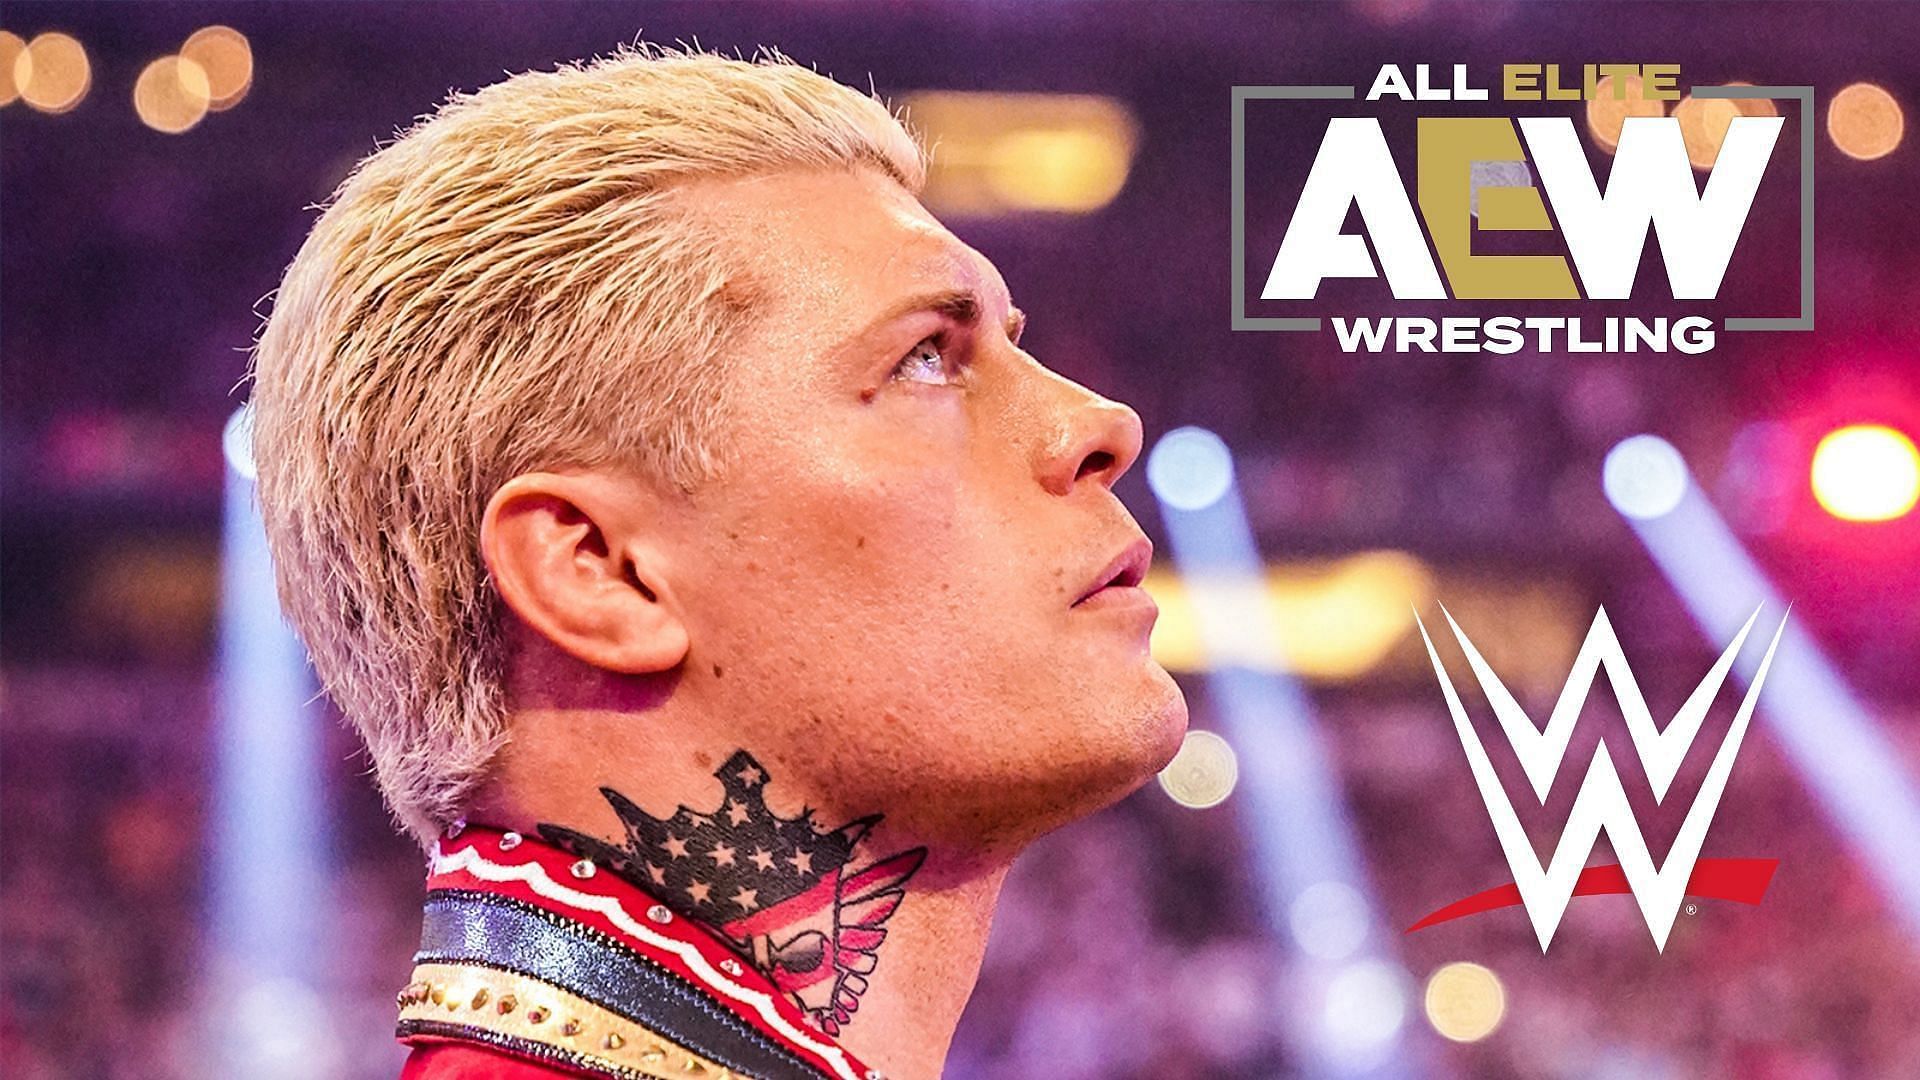 Cody Rhodes has worked in WWE as well as AEW